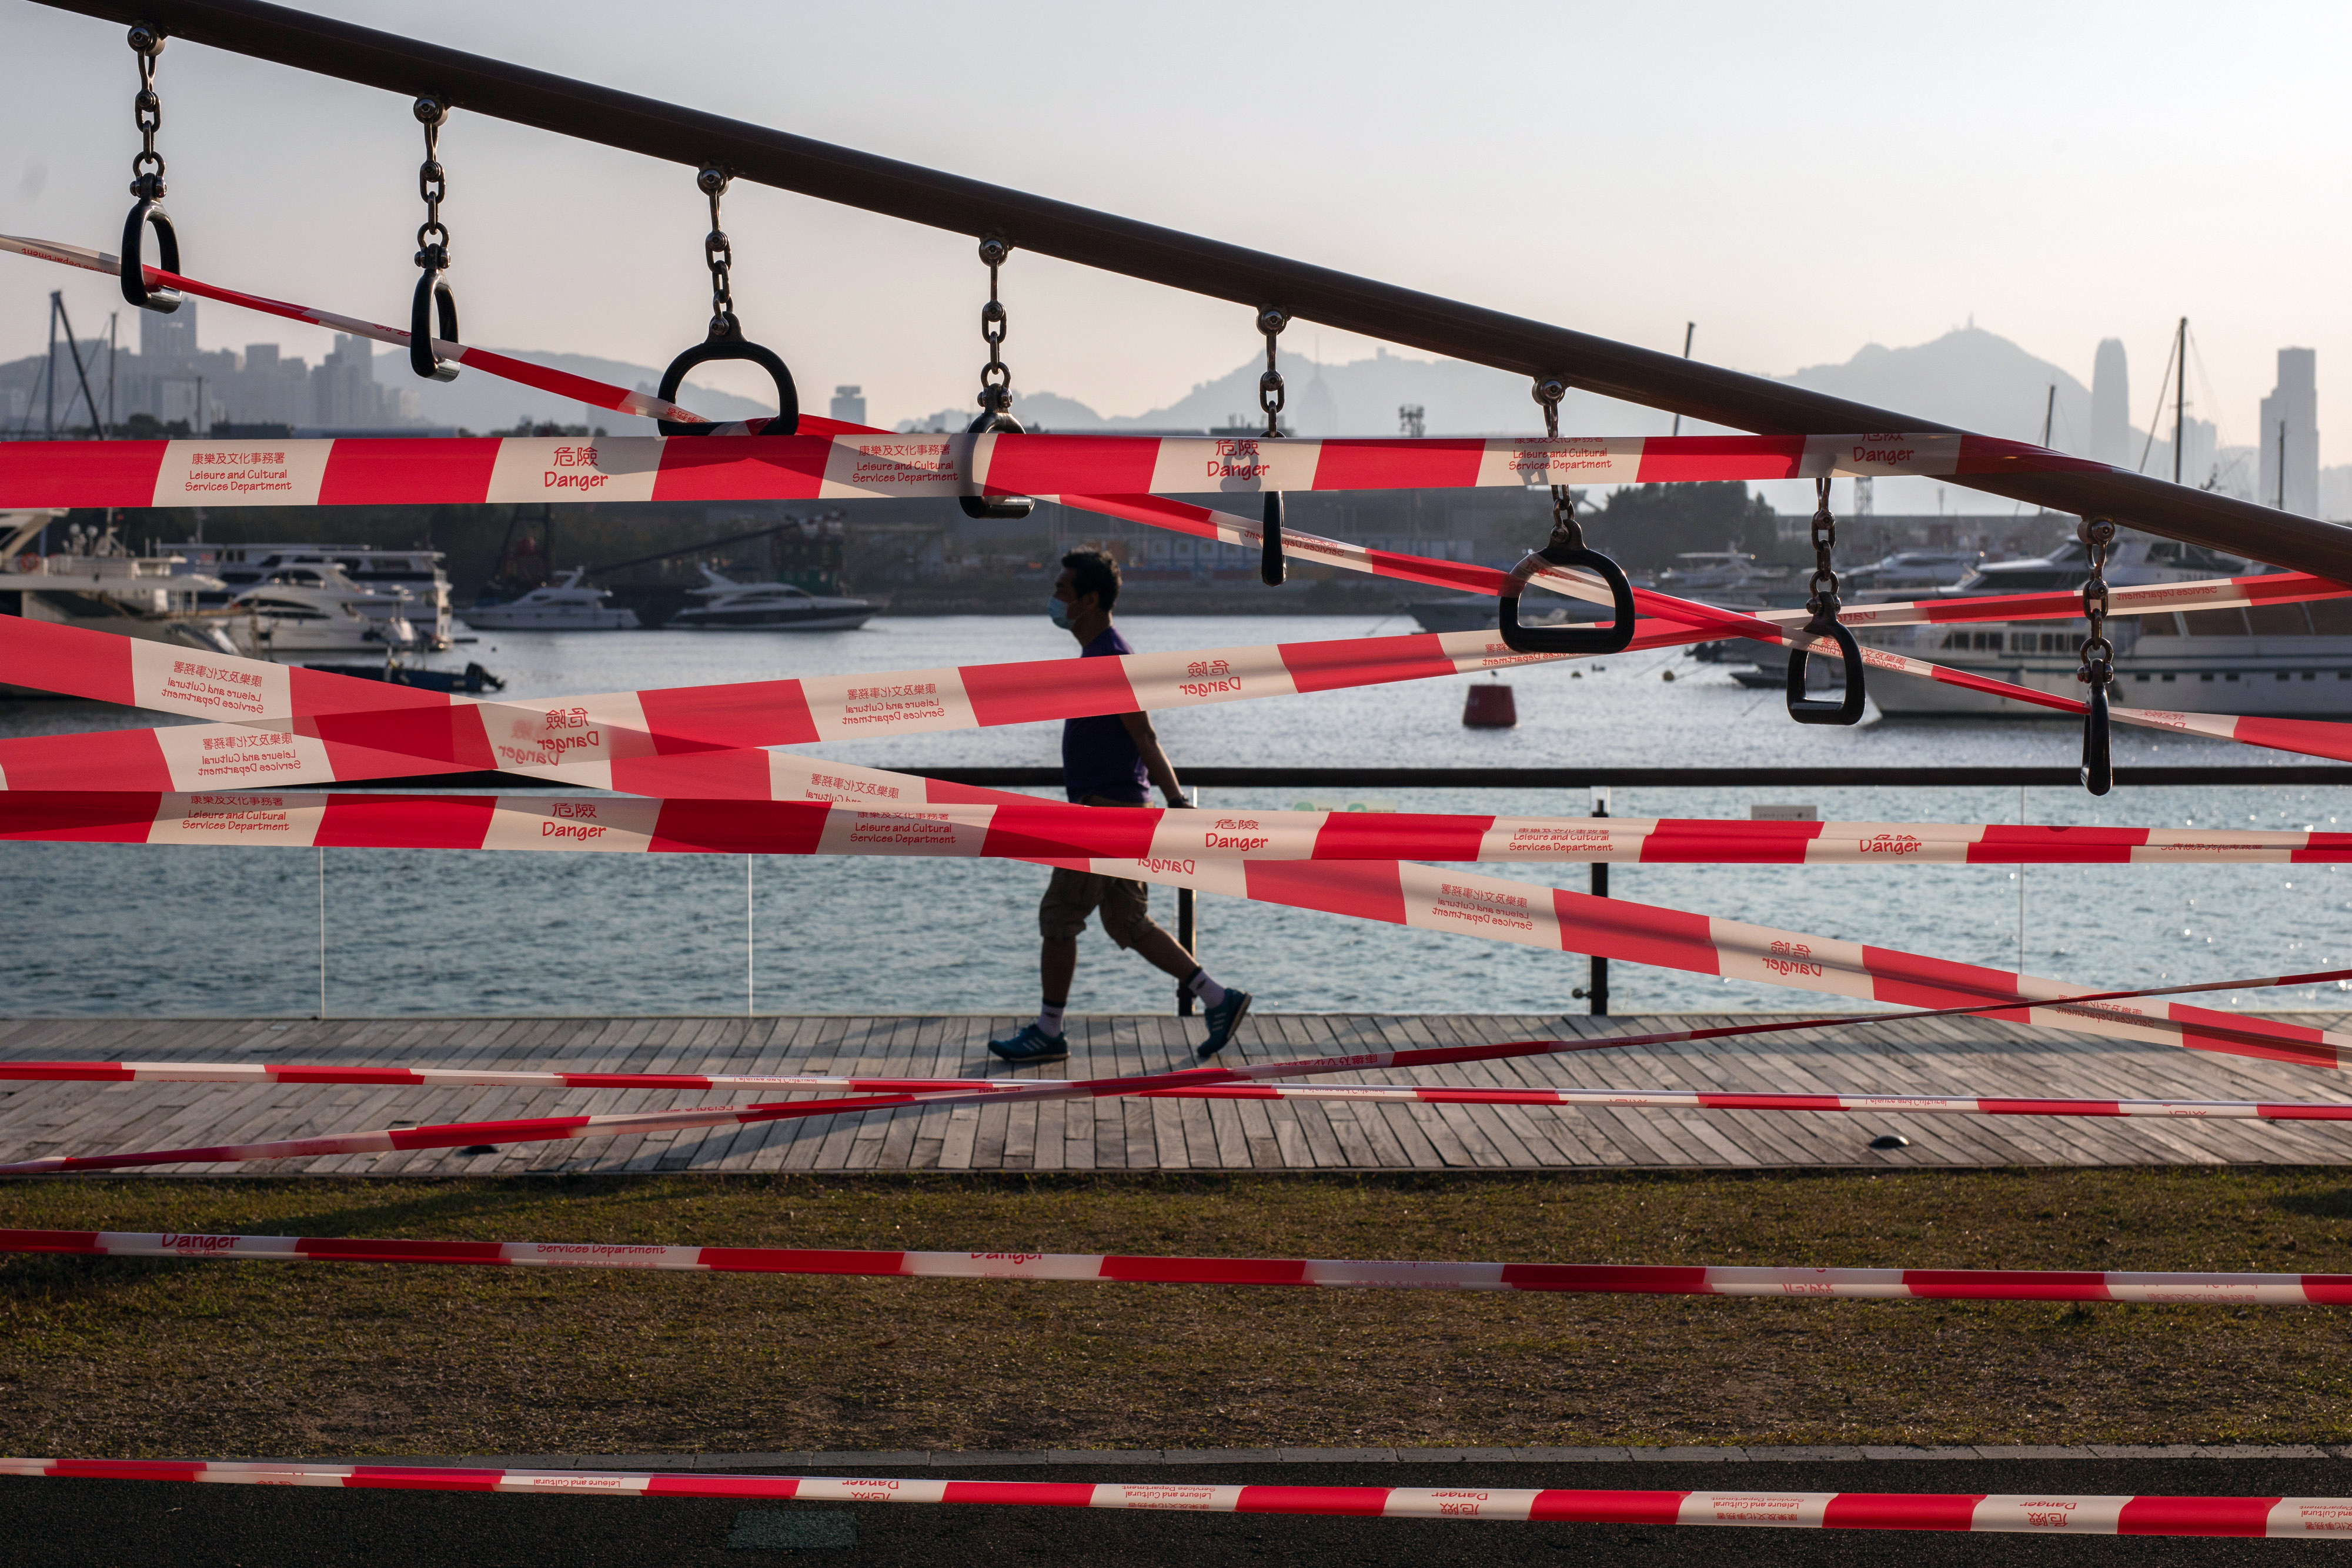 A pedestrian walks past tape cordoning off an outdoor firness area, closed due to Covid-19 restrictions, at the Kwun Tong Promenade in Hong Kong, on March 3. Photo Bloomberg